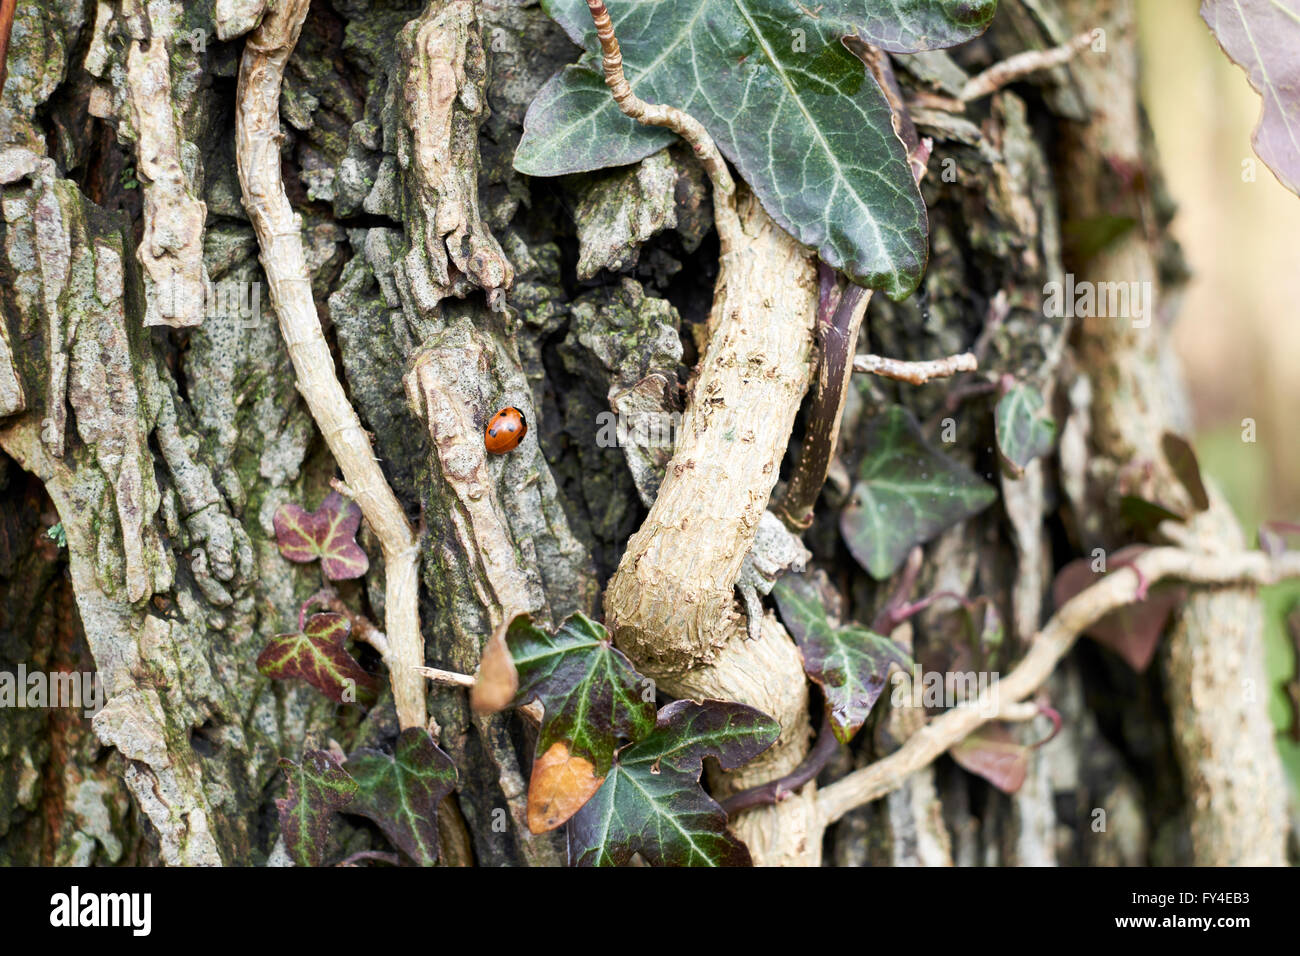 Ivy (Hedera helix) growing on the trunk of a tree, with a 7-Spot Ladybird (Coccinella 7-punctata) emerging from hibernation. Stock Photo